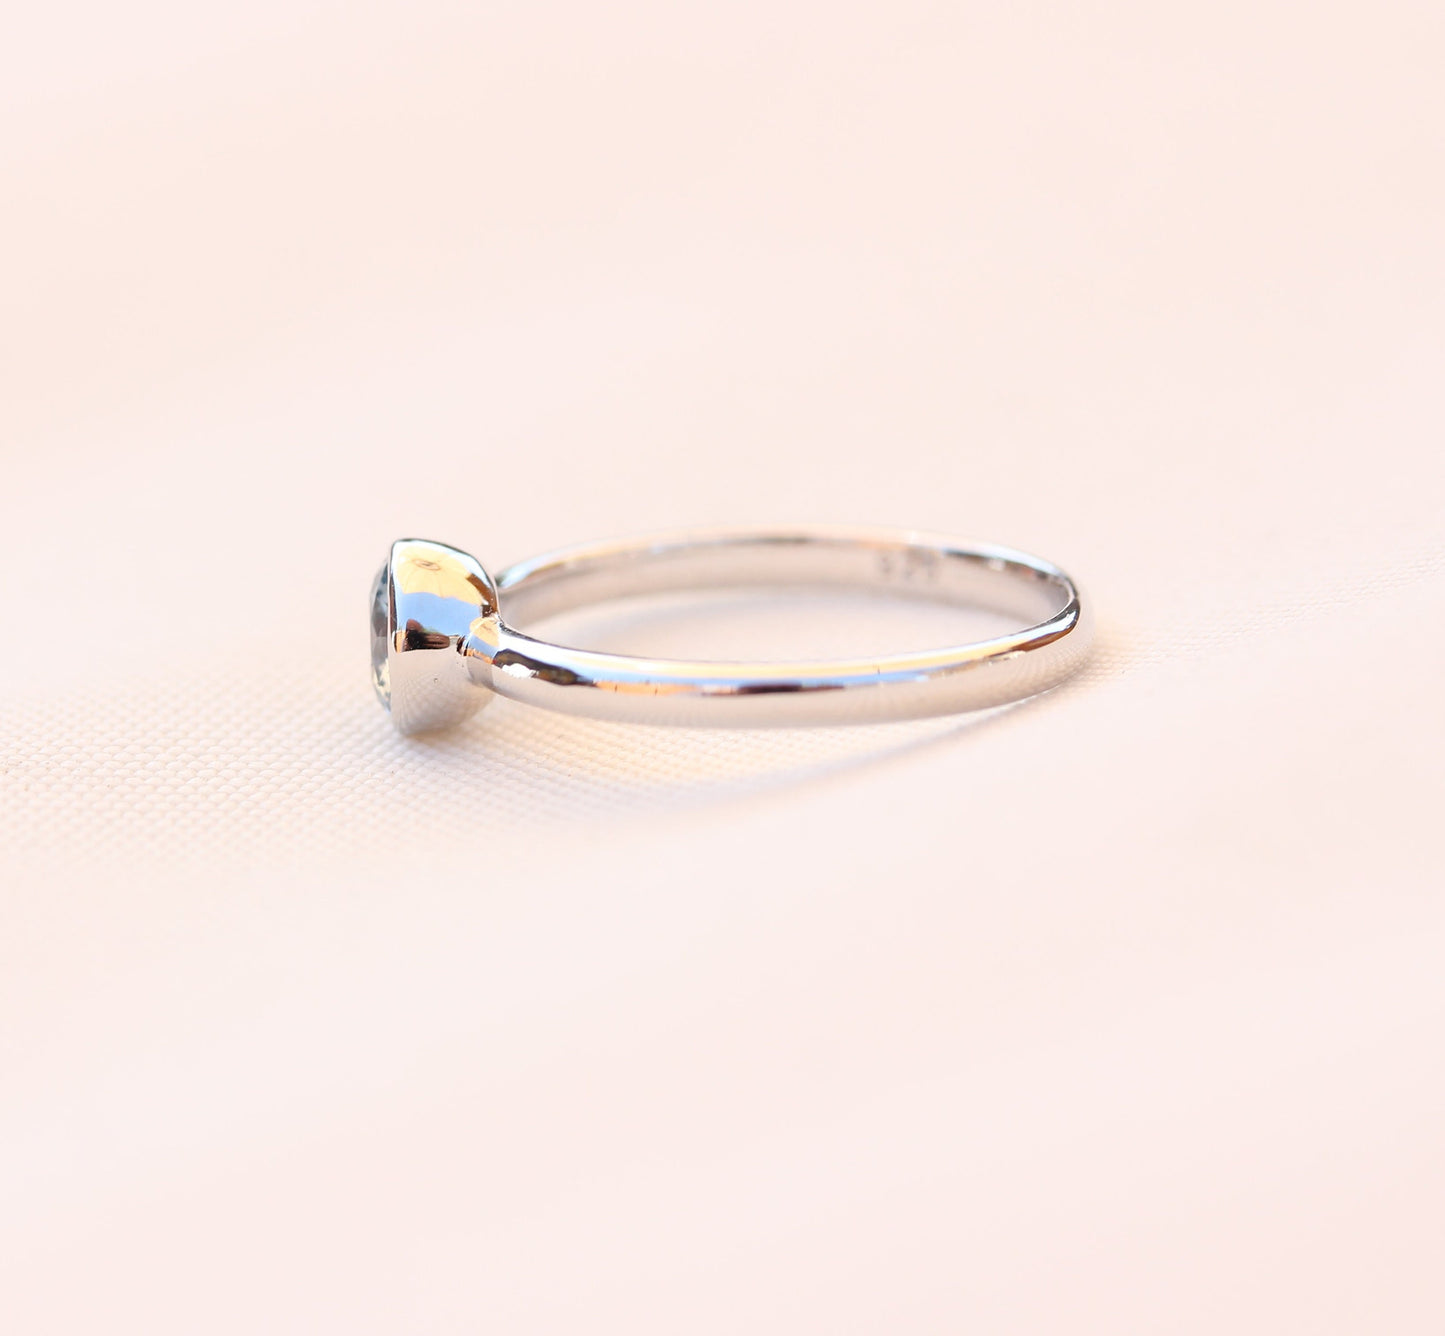 Natural Aquamarine bezel set solitaire ring - Available in white gold or sterling silver - handmade ring